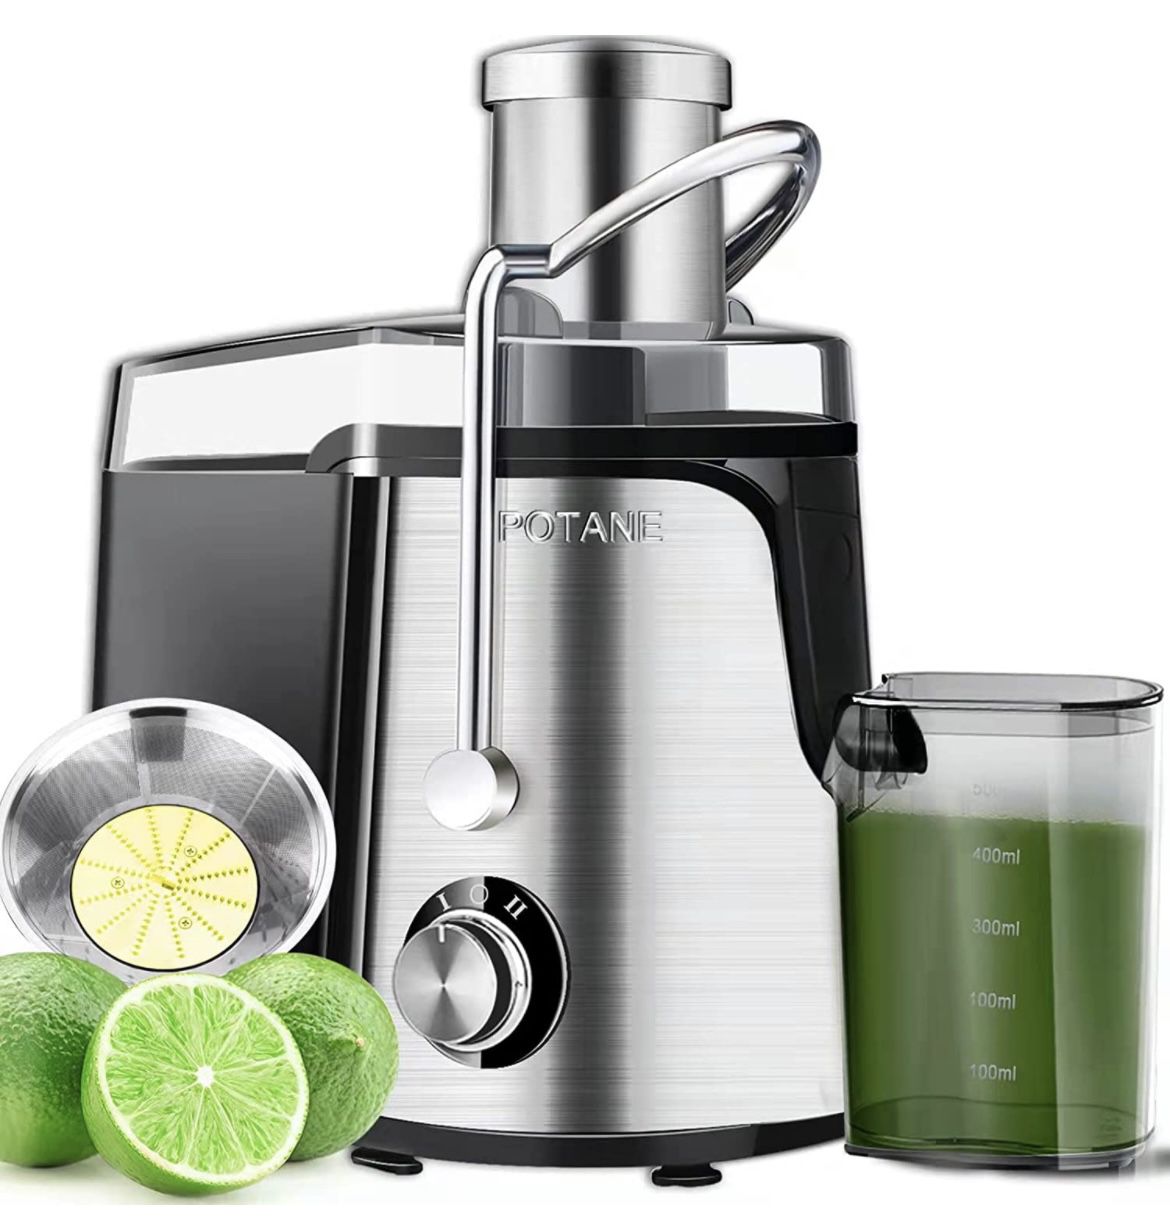 POTANE Juicer Machine Centrifugal Juicer, Easy to Clean Juice Extractor, Juicer Machines for Vegetable and Fruit, 700 Watts, Titanium Enhanced Filter